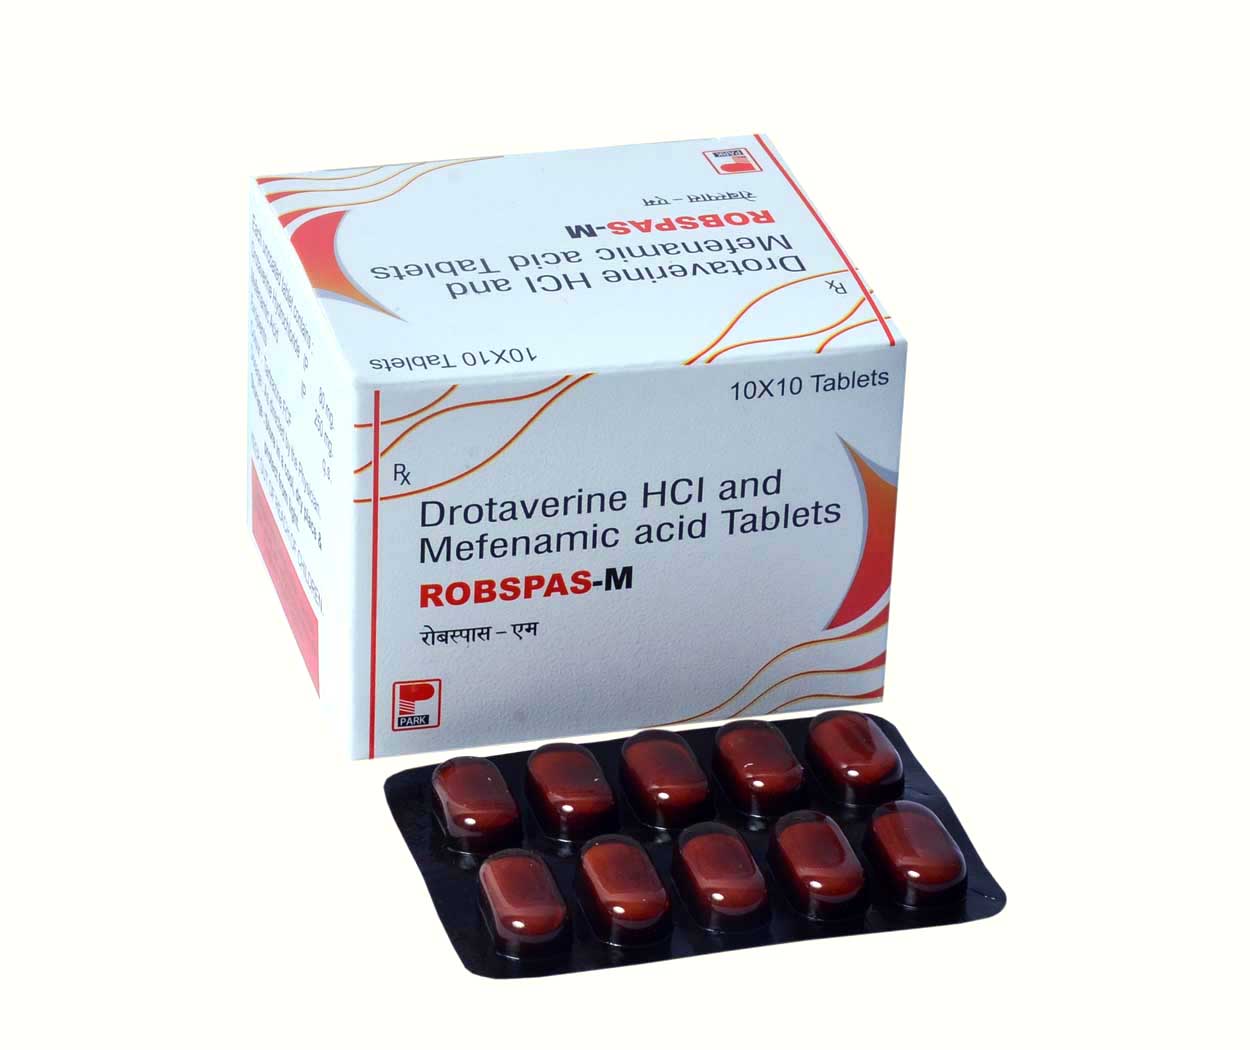 Product Name: ROBSPAS M, Compositions of ROBSPAS M are Drotaverine HCL and Mefenamic Acid Tablets  - Park Pharmaceuticals